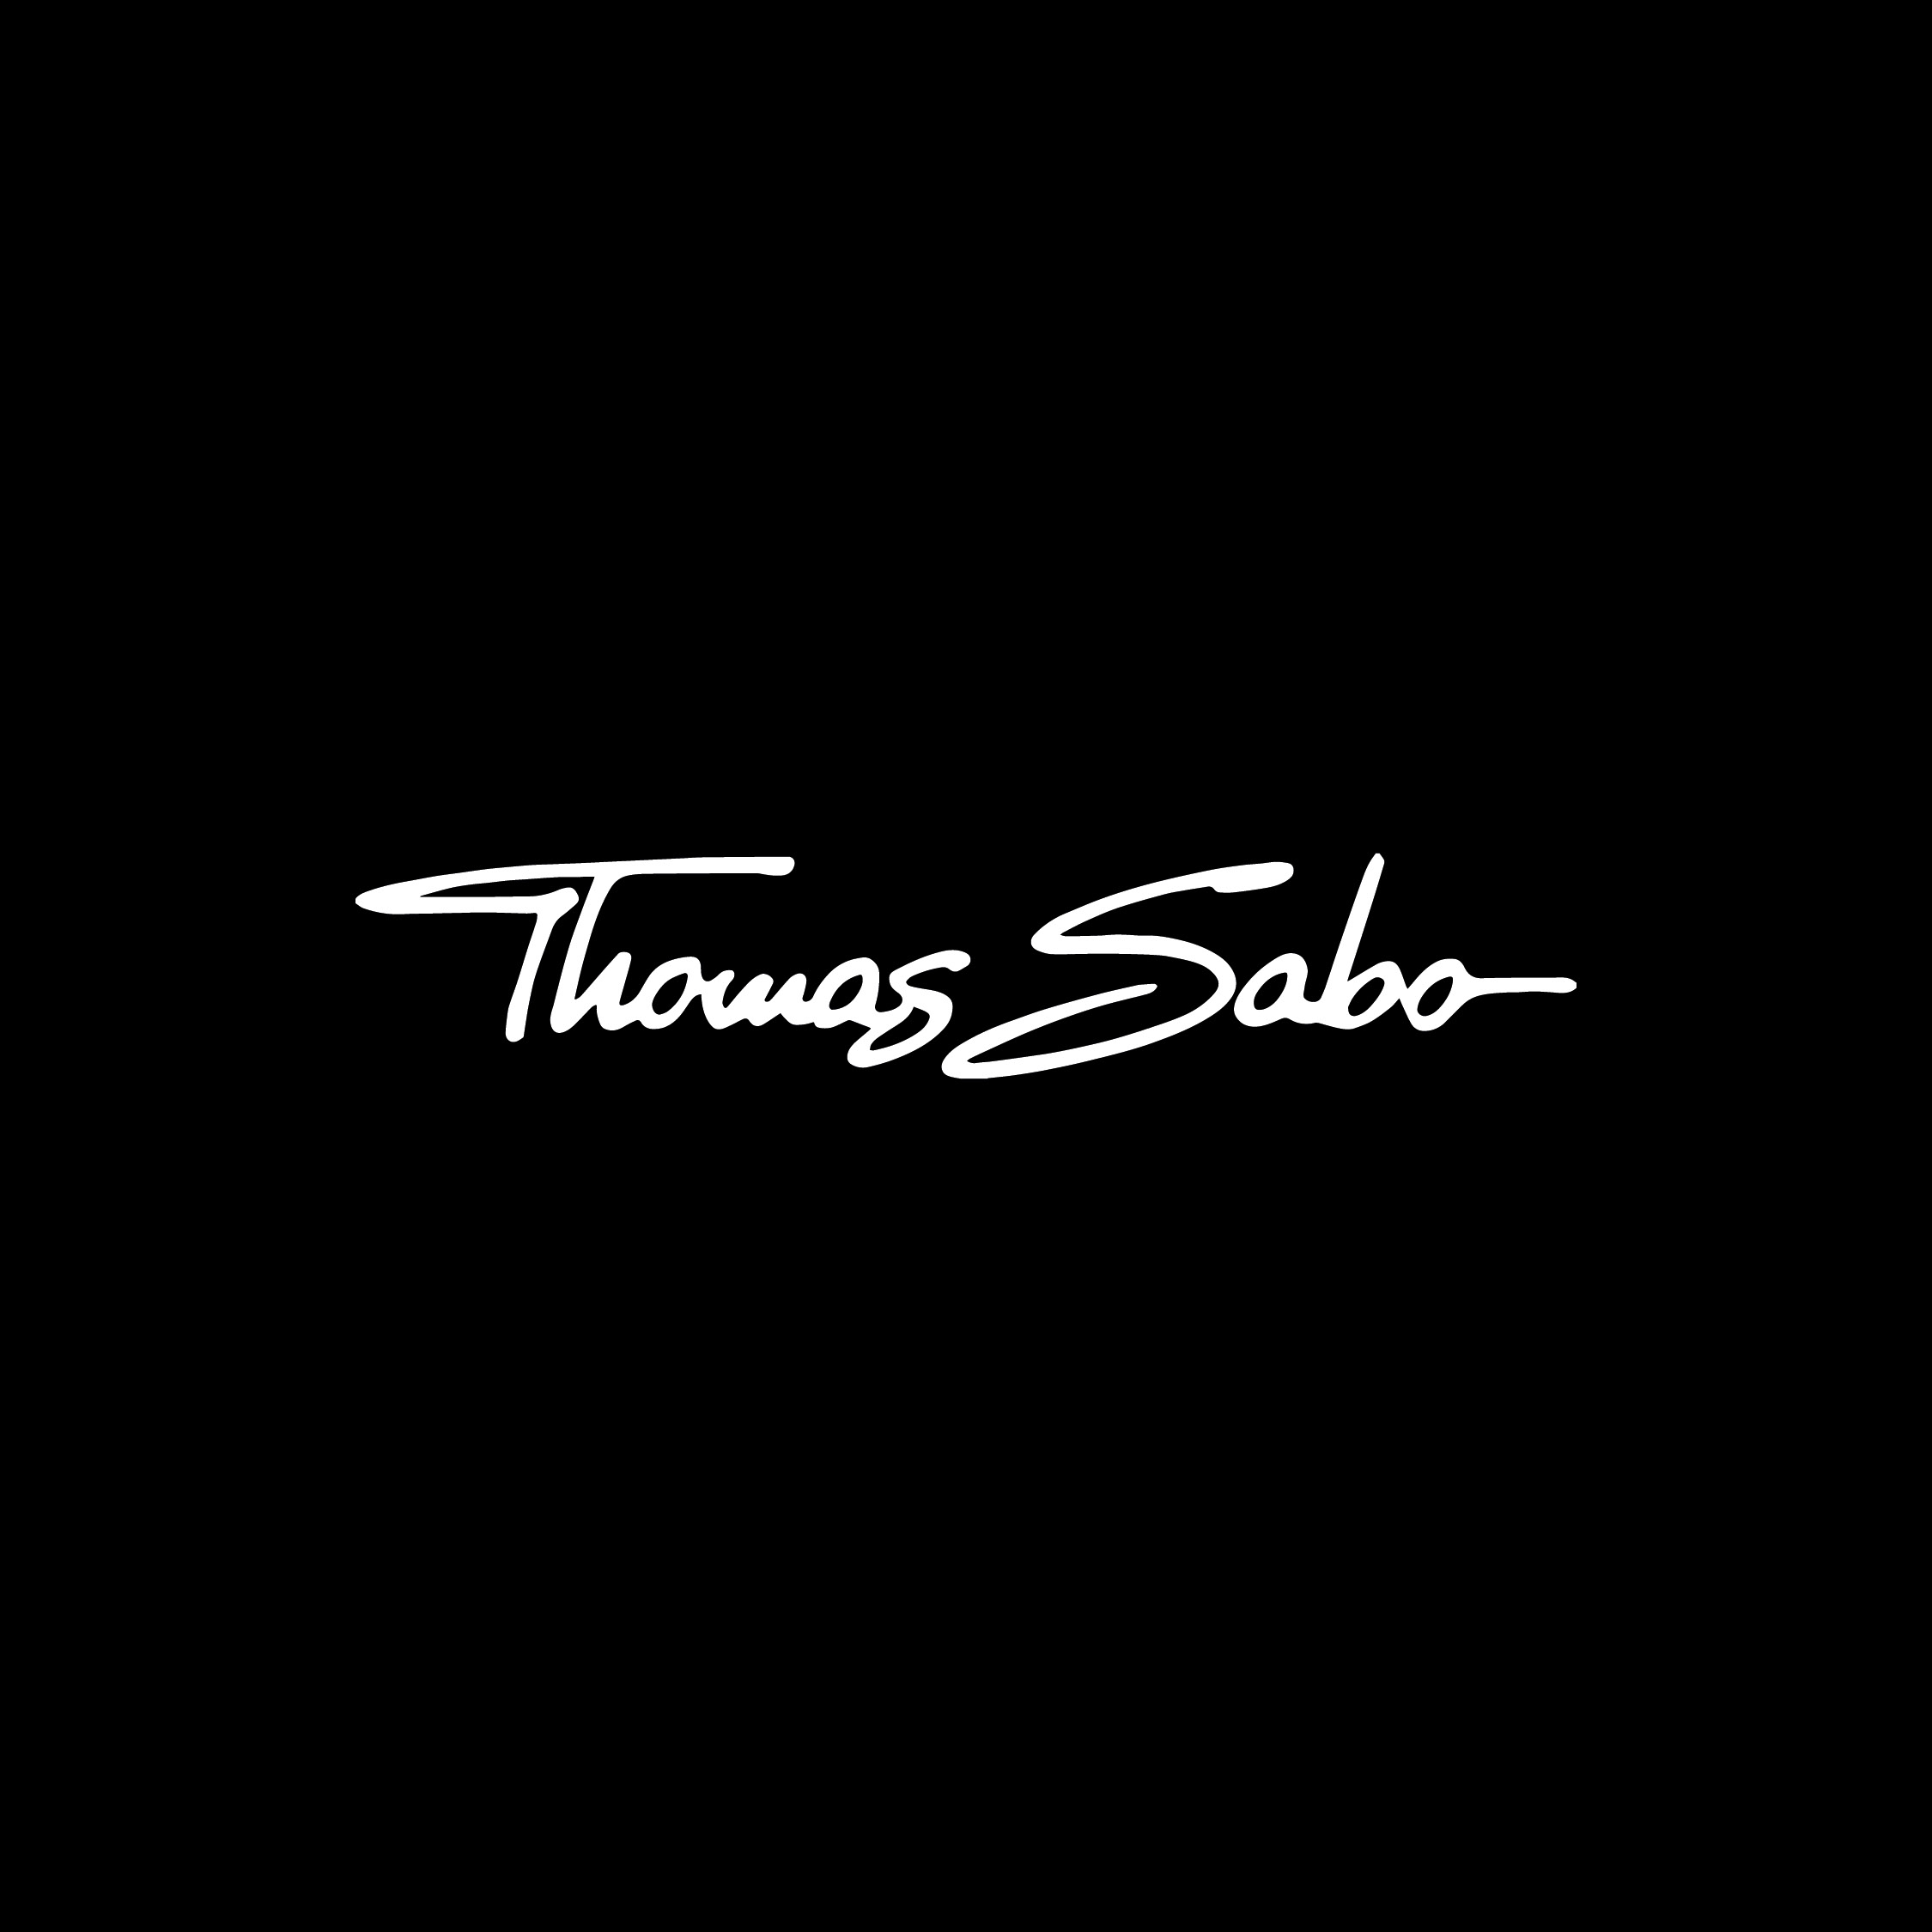 Celebrate her this Mother’s Day with THOMAS SABO